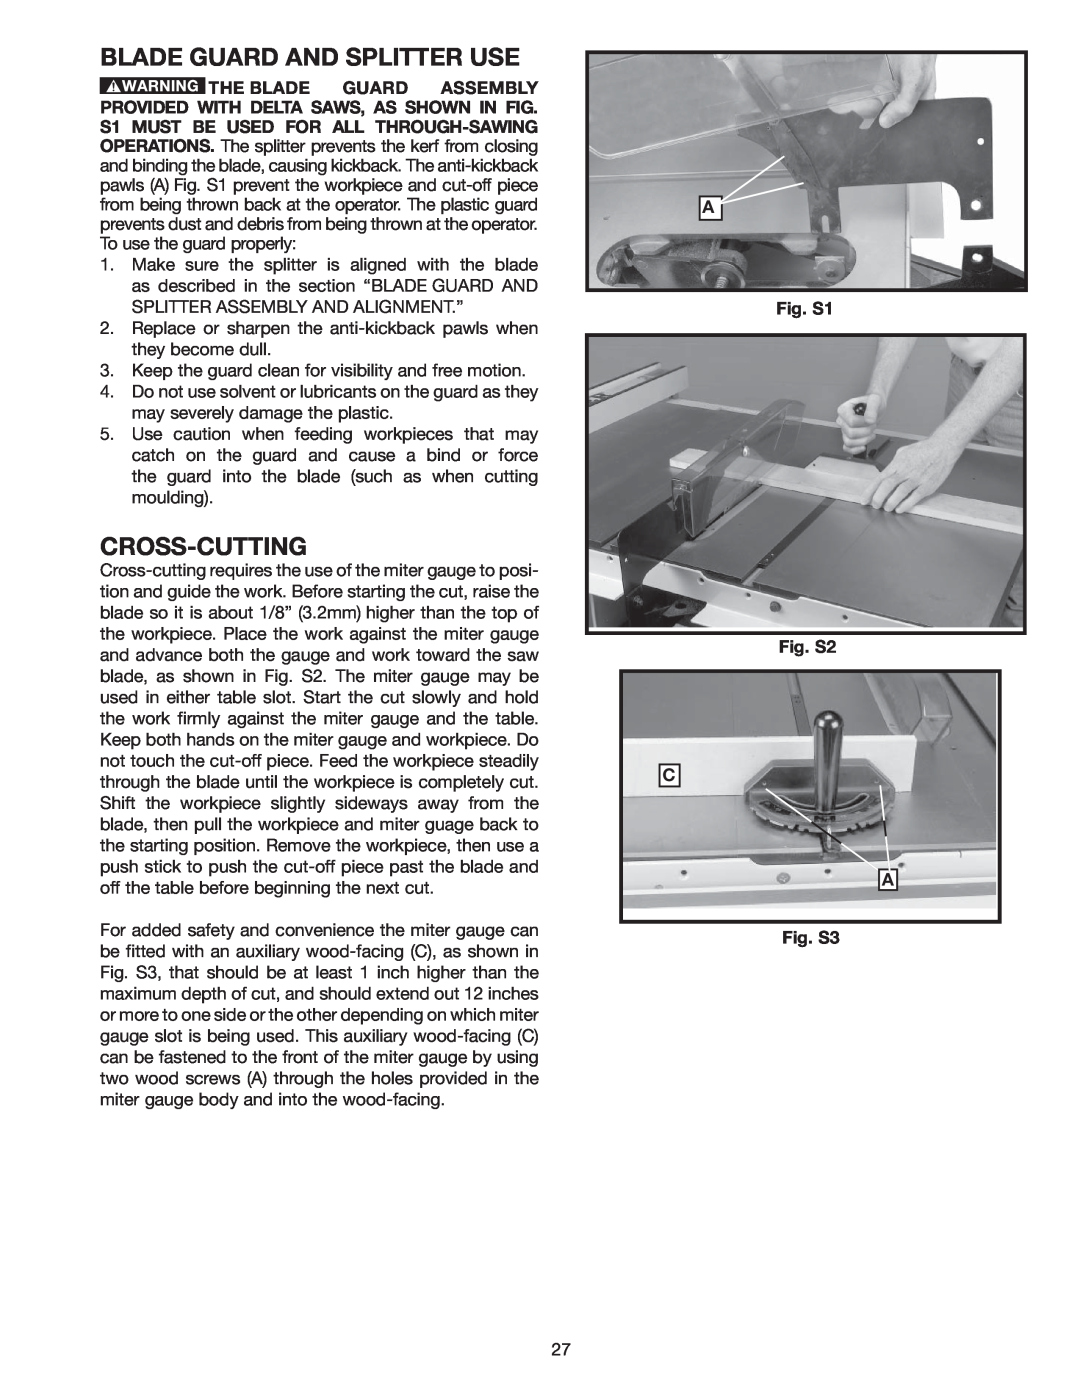 Delta 36-978 instruction manual Blade Guard And Splitter Use, Cross-Cutting, A Fig. S1 Fig. S2 C A Fig. S3 